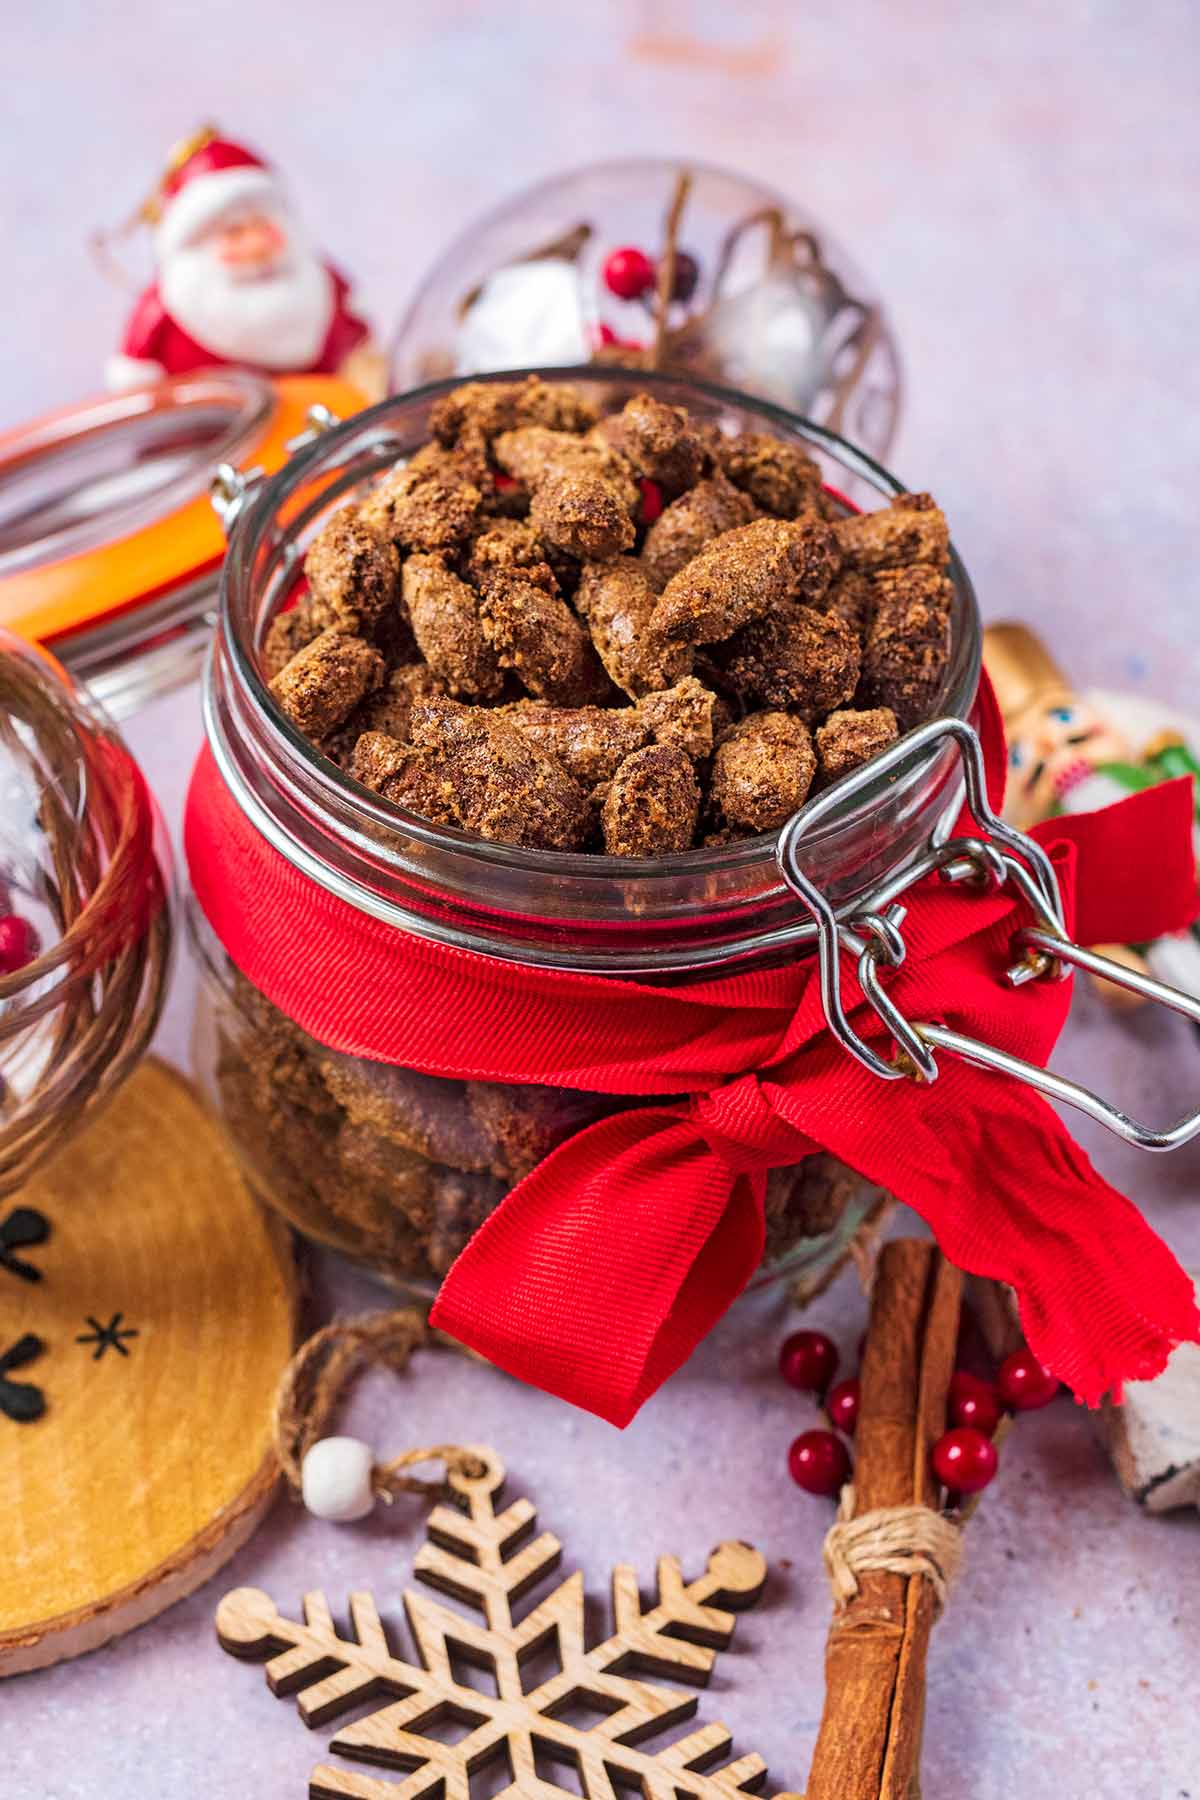 A jar of roasted almonds surrounded by Christmas decorations.